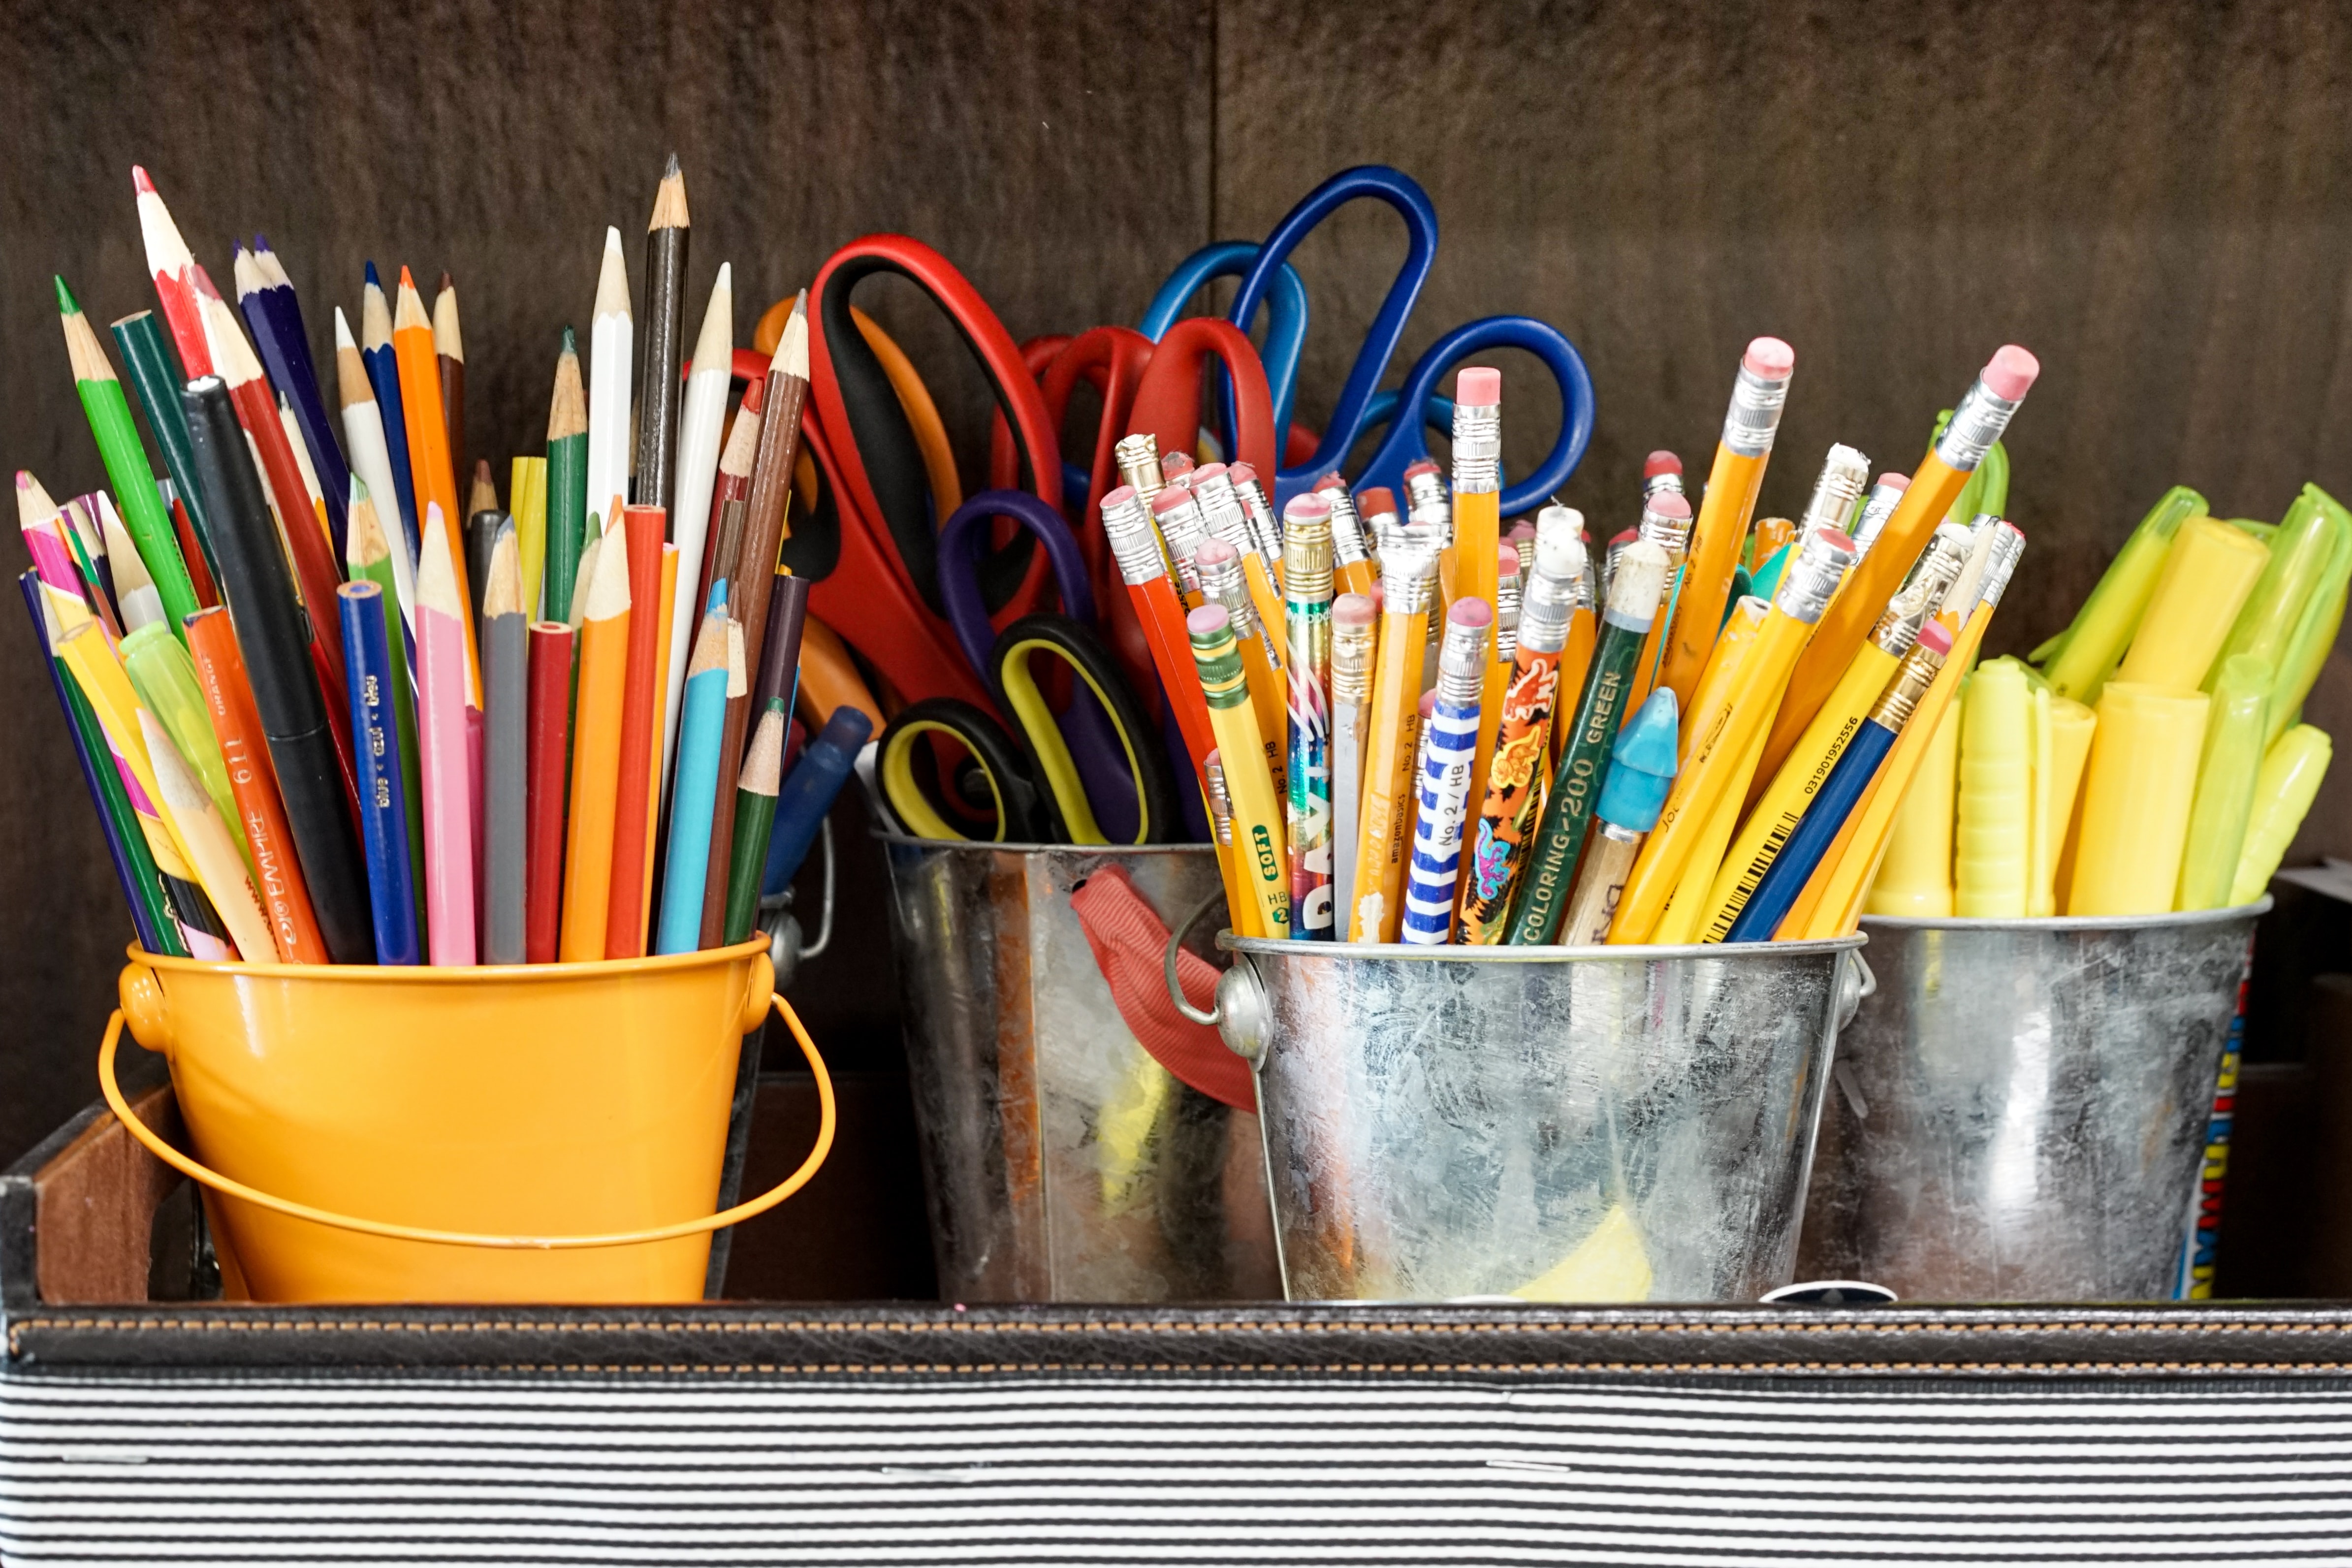 12 Unique Items to Add to Your Classroom Donation Lists